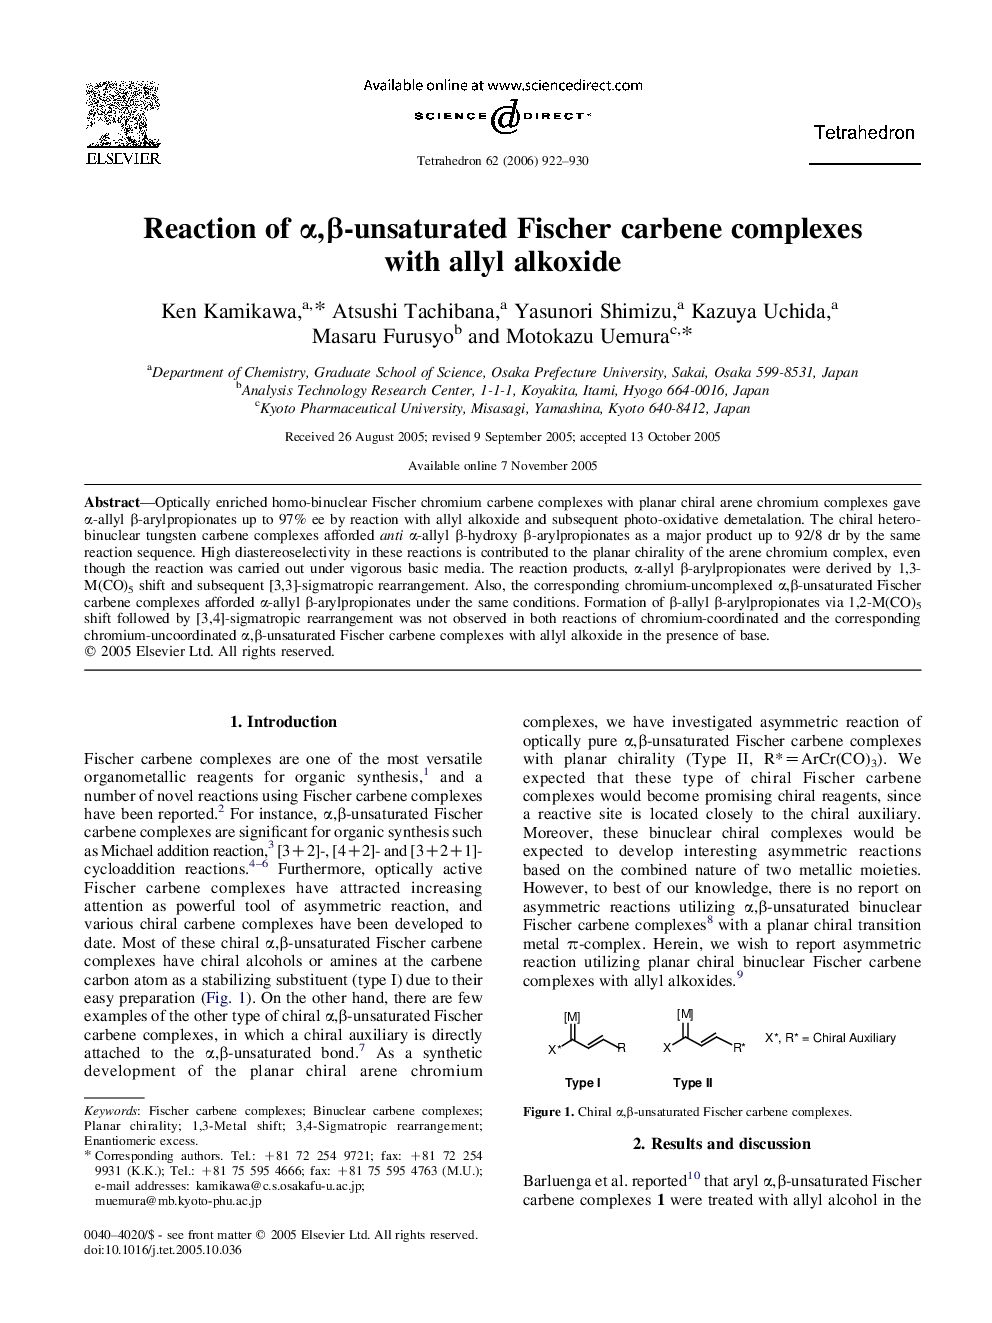 Reaction of Î±,Î²-unsaturated Fischer carbene complexes with allyl alkoxide